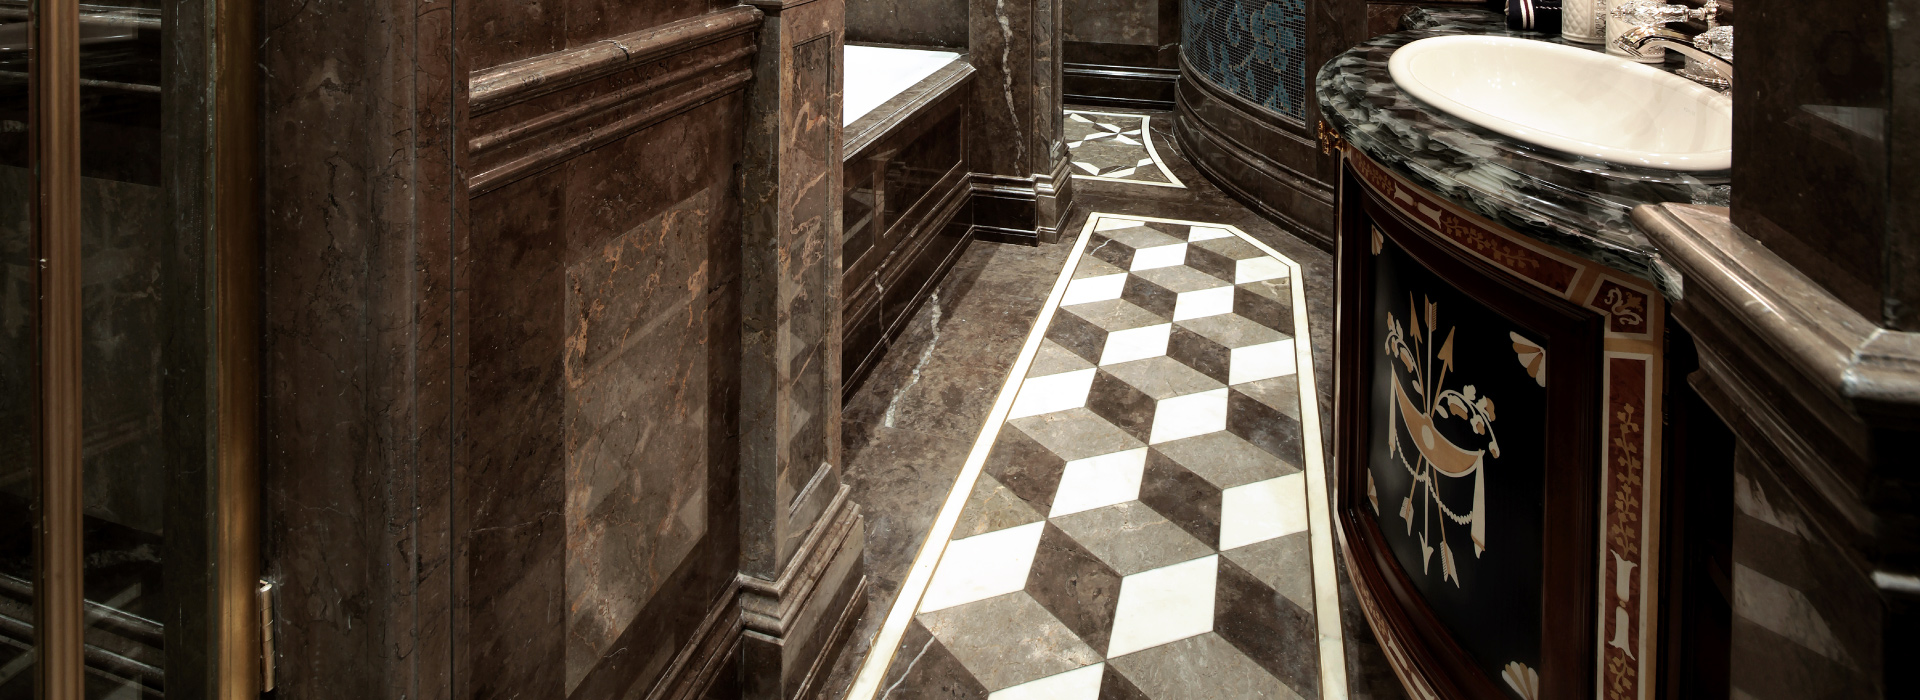 Marble Works for Luxury Interiors